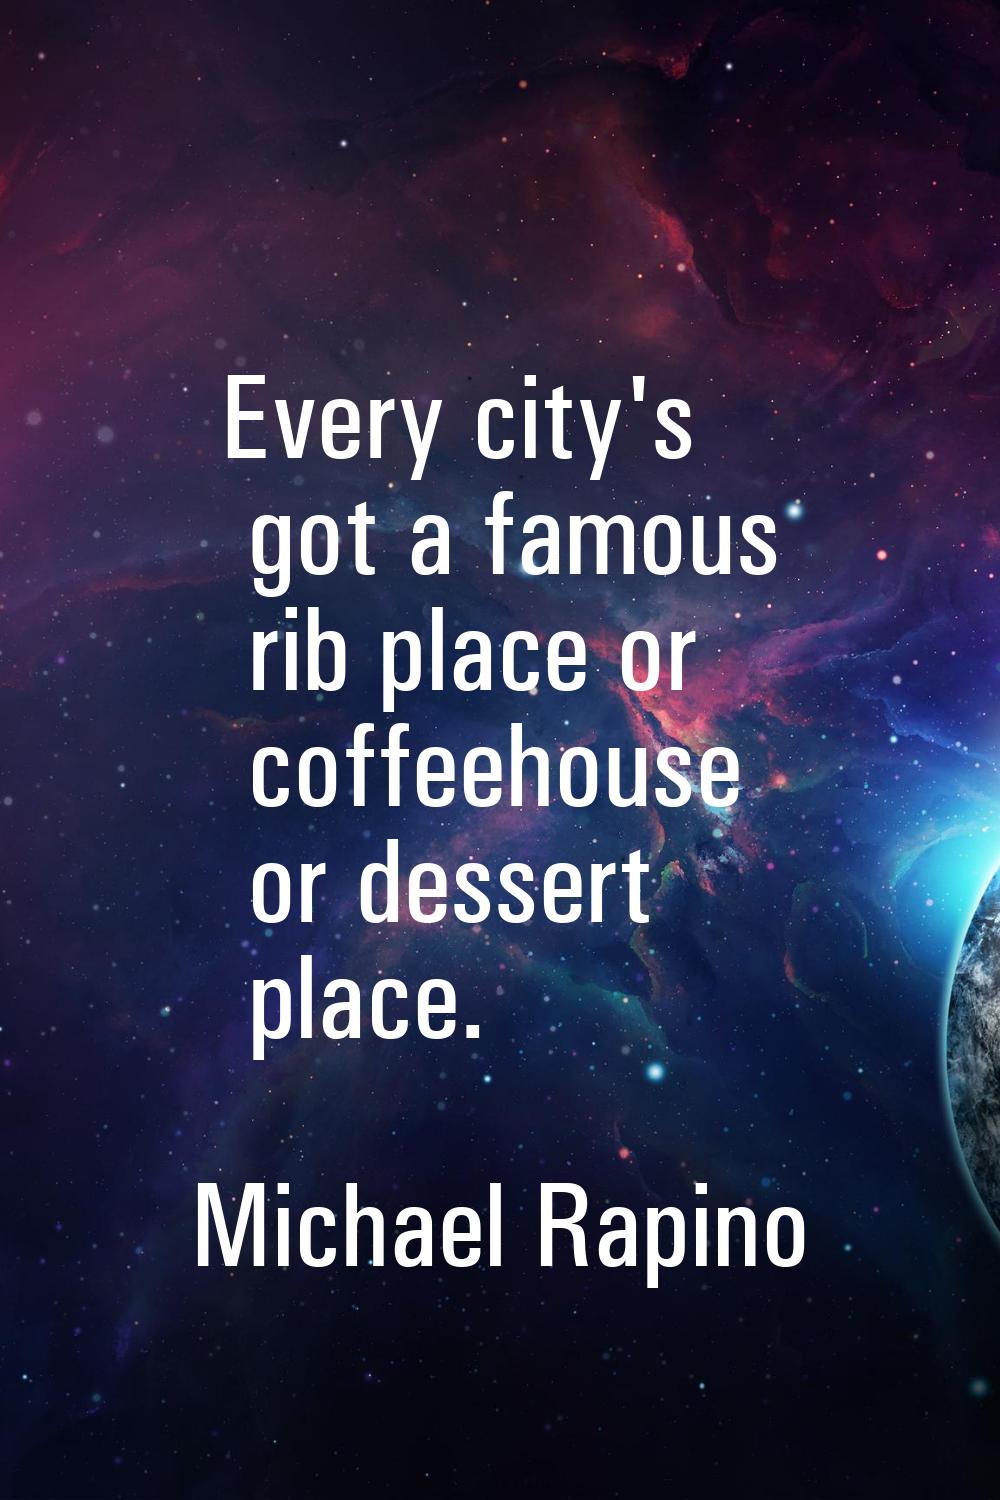 Every city's got a famous rib place or coffeehouse or dessert place.